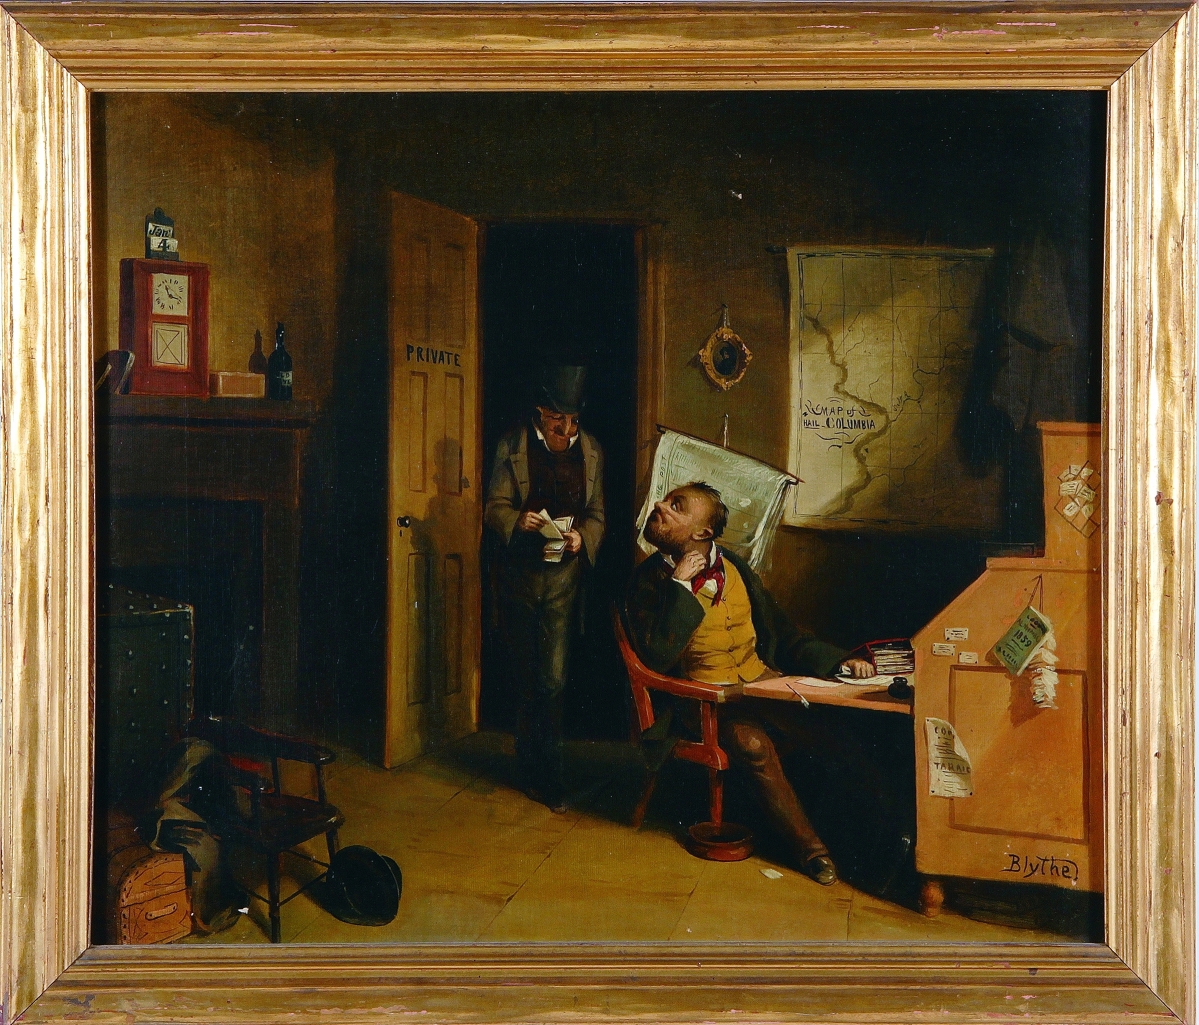 “January Bills,” an important 1859 work by genre painter David Gilmour Blythe (1815–1865), sold to American art specialist Thomas Colville for $420,000. Owned by Francis P. Garvan before Millicent Rogers acquired it, it has a distinguished exhibitions and publications history but had been off the market for decades.